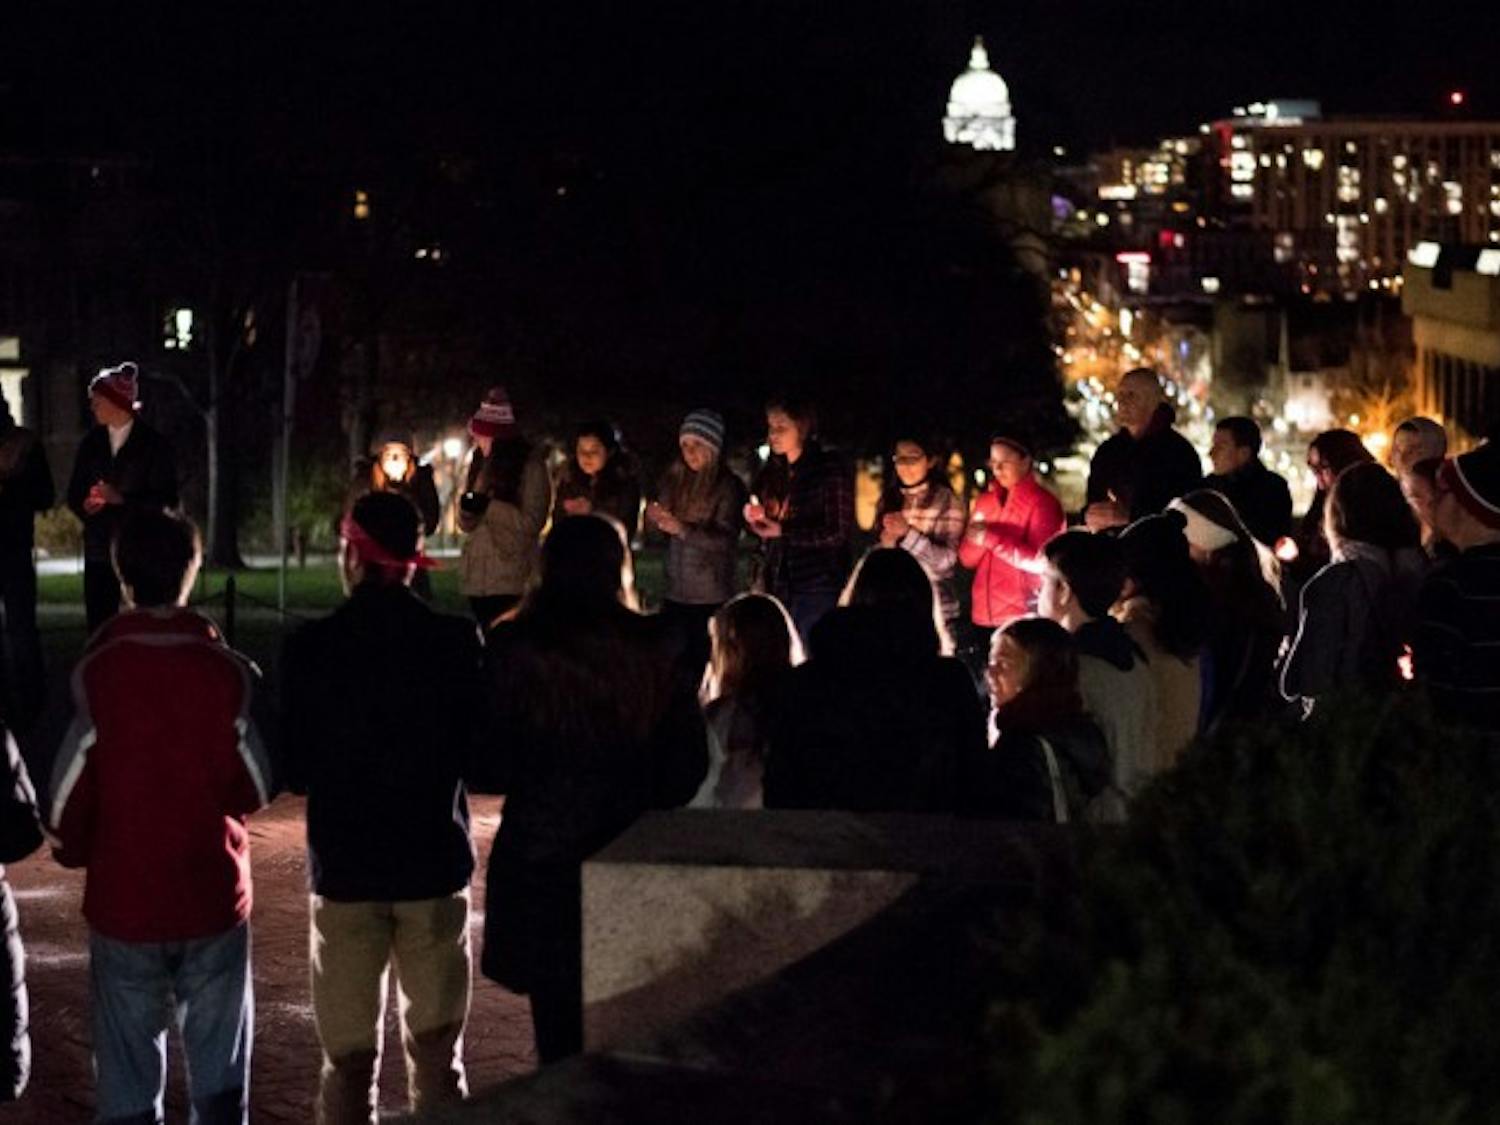 On Nov. 13, UW students held a candlelit vigil at Bascom Hill to show their support for the people of Paris.